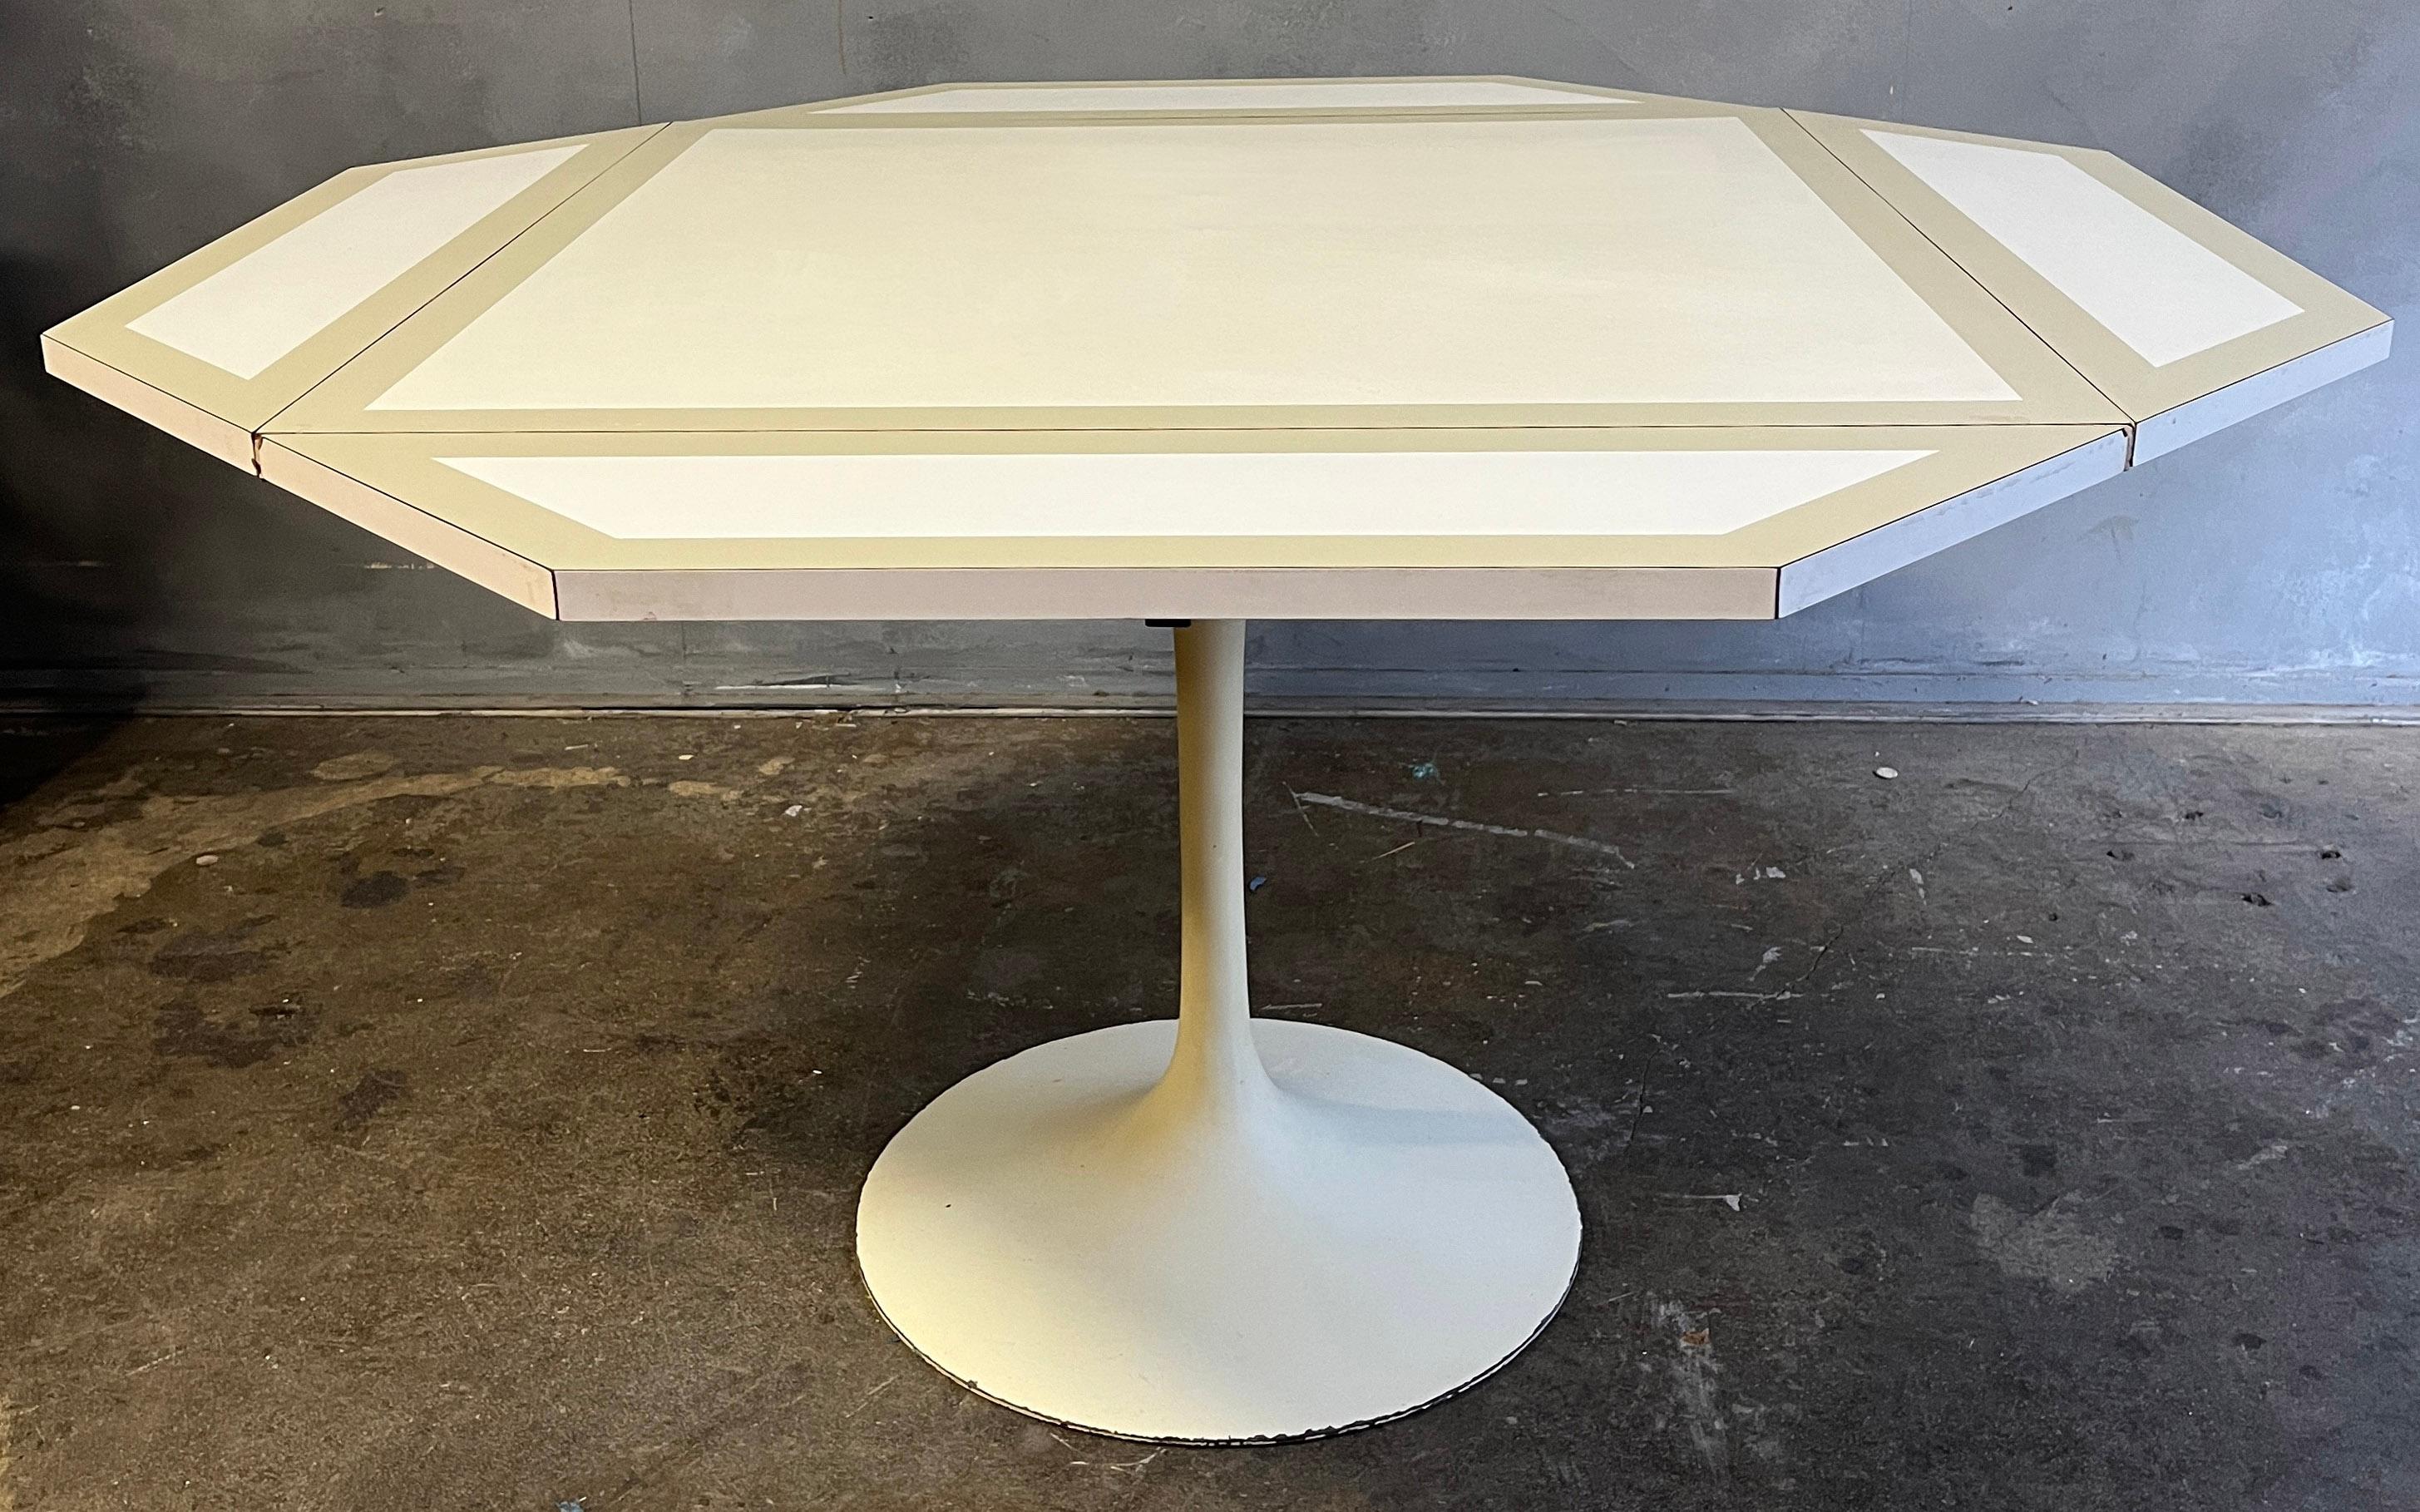 Rare collectors item designed by Alexander Girard. 

Dining table from Dragon Peak House.
This table is one of four examples created for the Dragon Peak House. Features four folding leaves; table measures 34 w x 34 d inches when folded. Laminate and